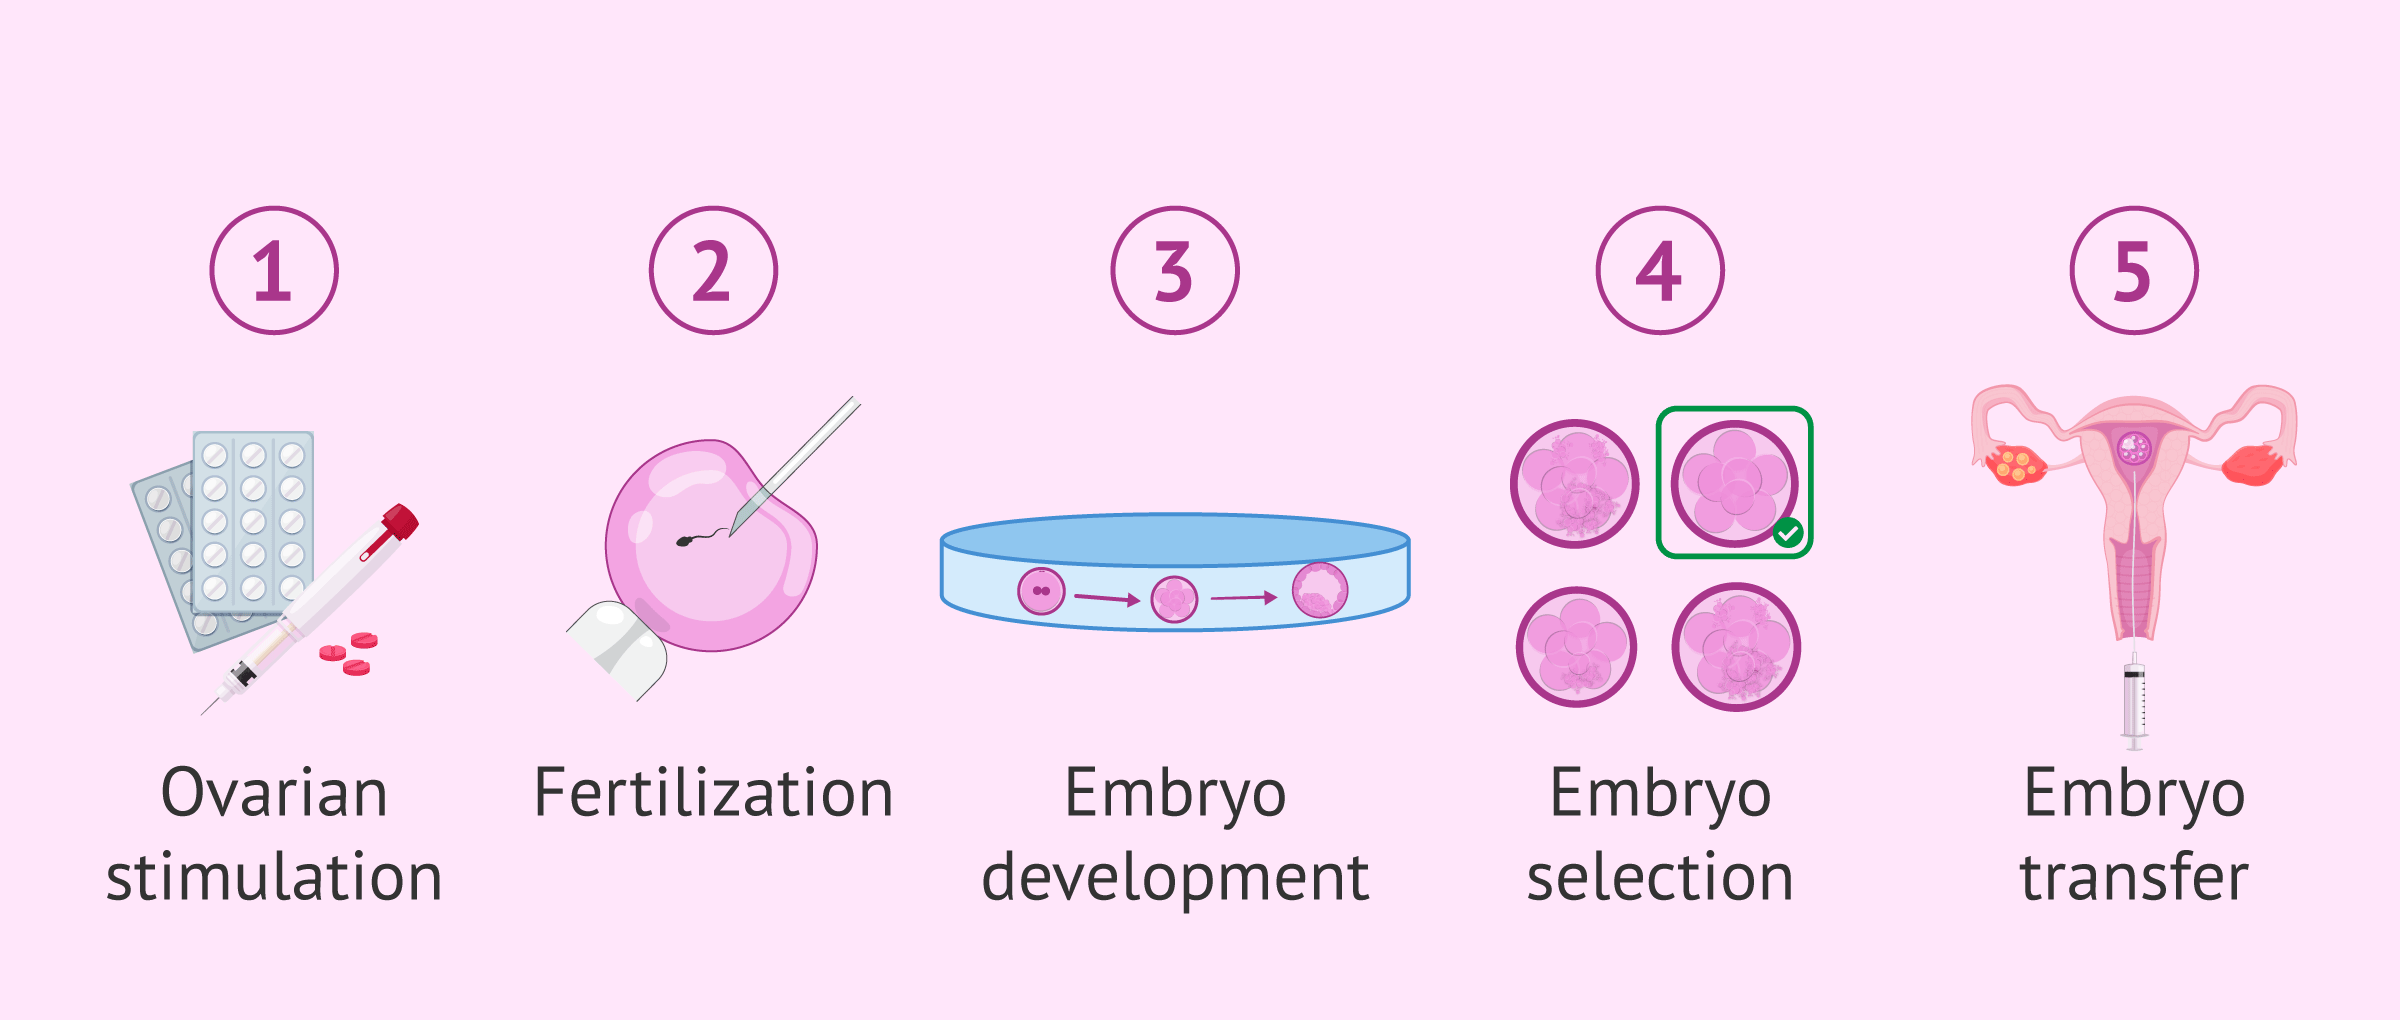 Advantages in the IVF process